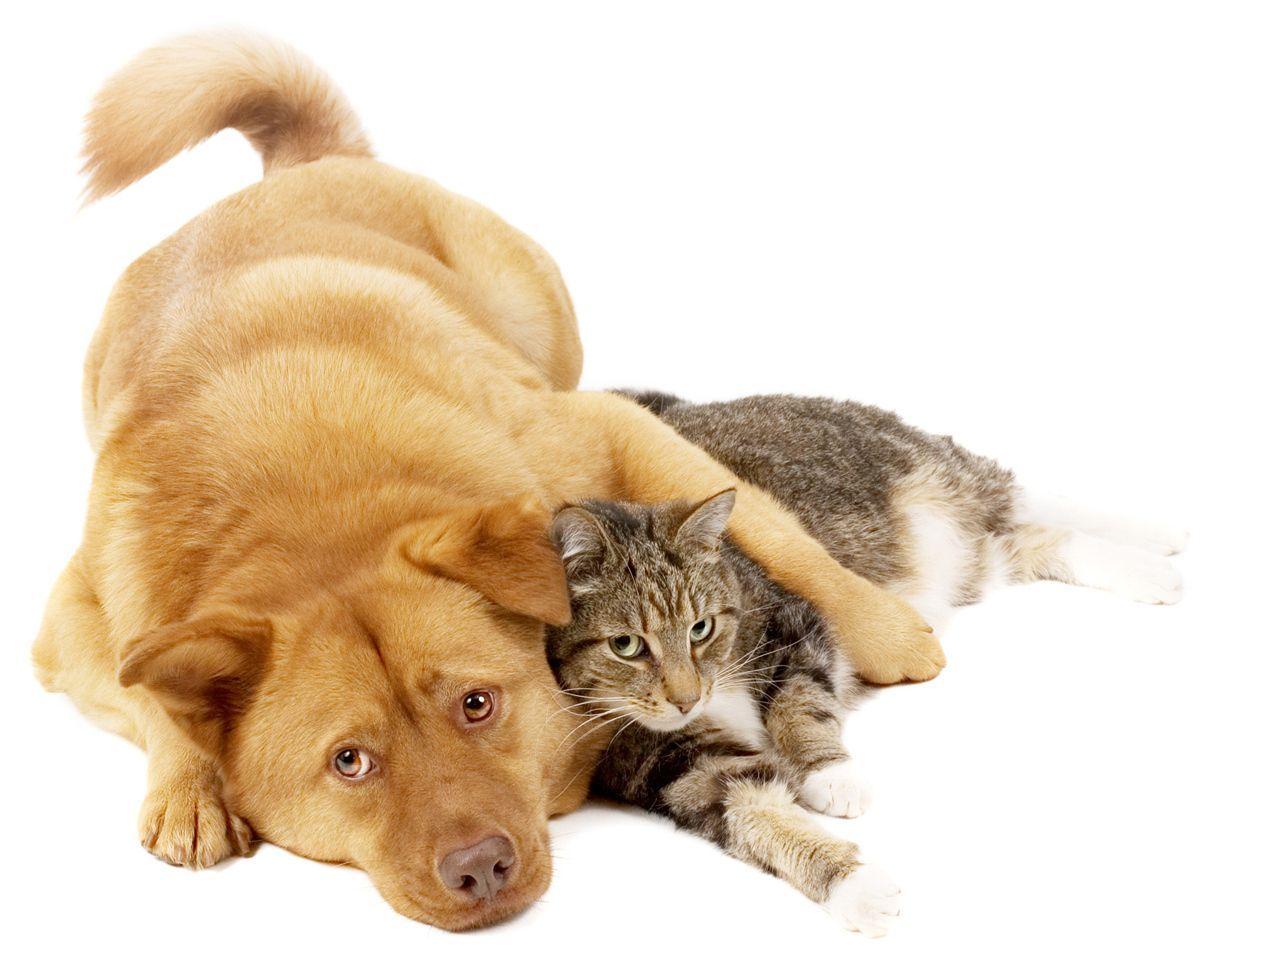 Animals For > Dog And Cat Wallpapers